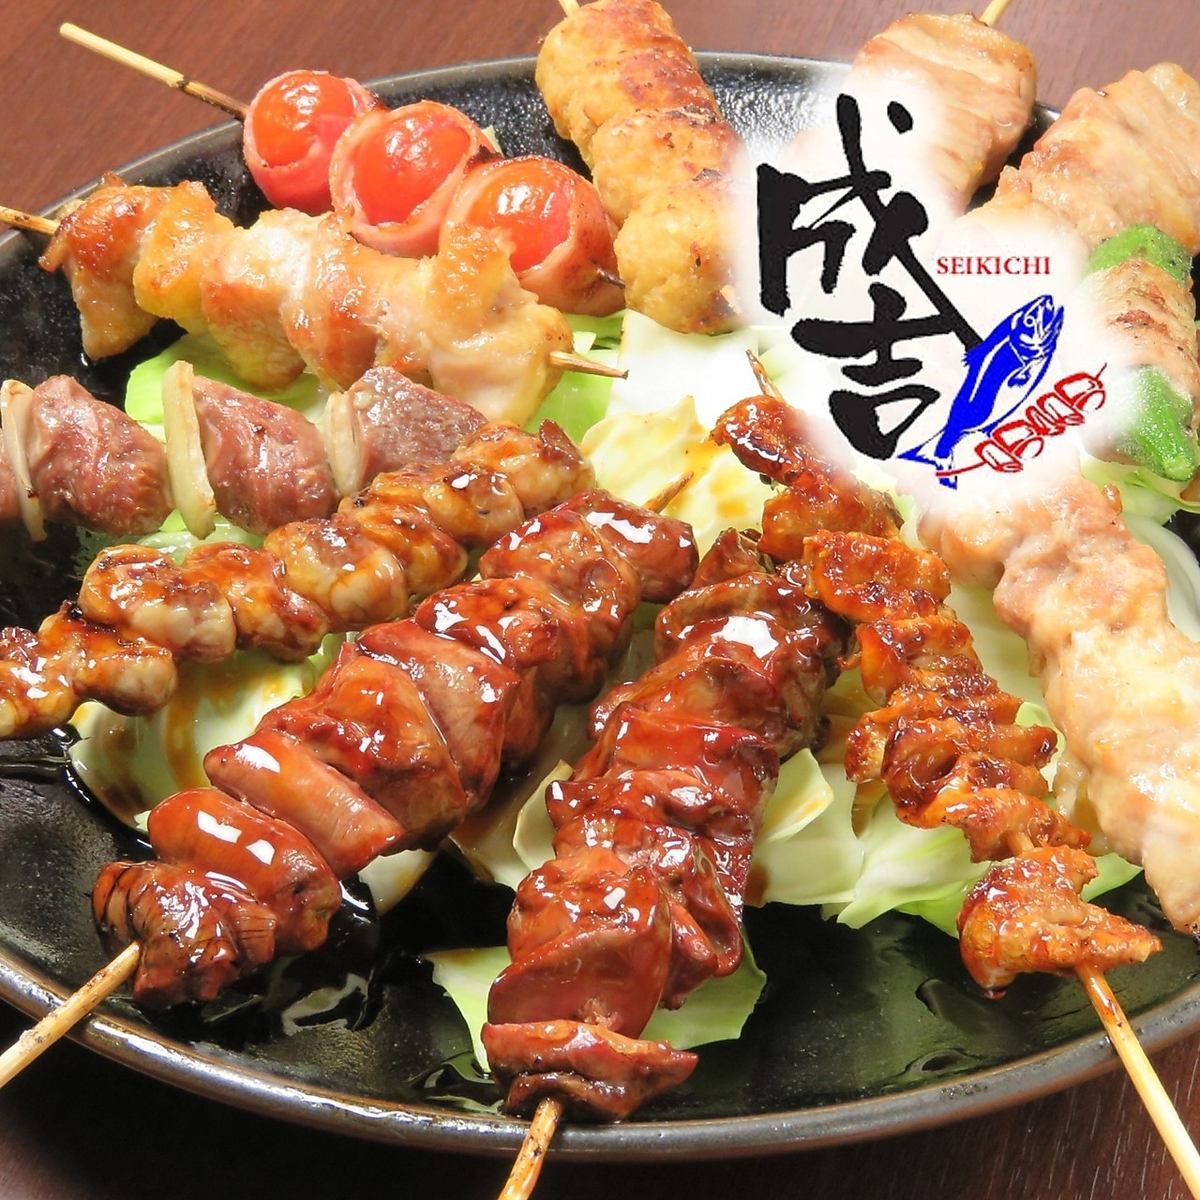 Speaking of Daimyo Yakitori, Seikichi / Daimyo store! There are also affiliated stores, so check it out ♪